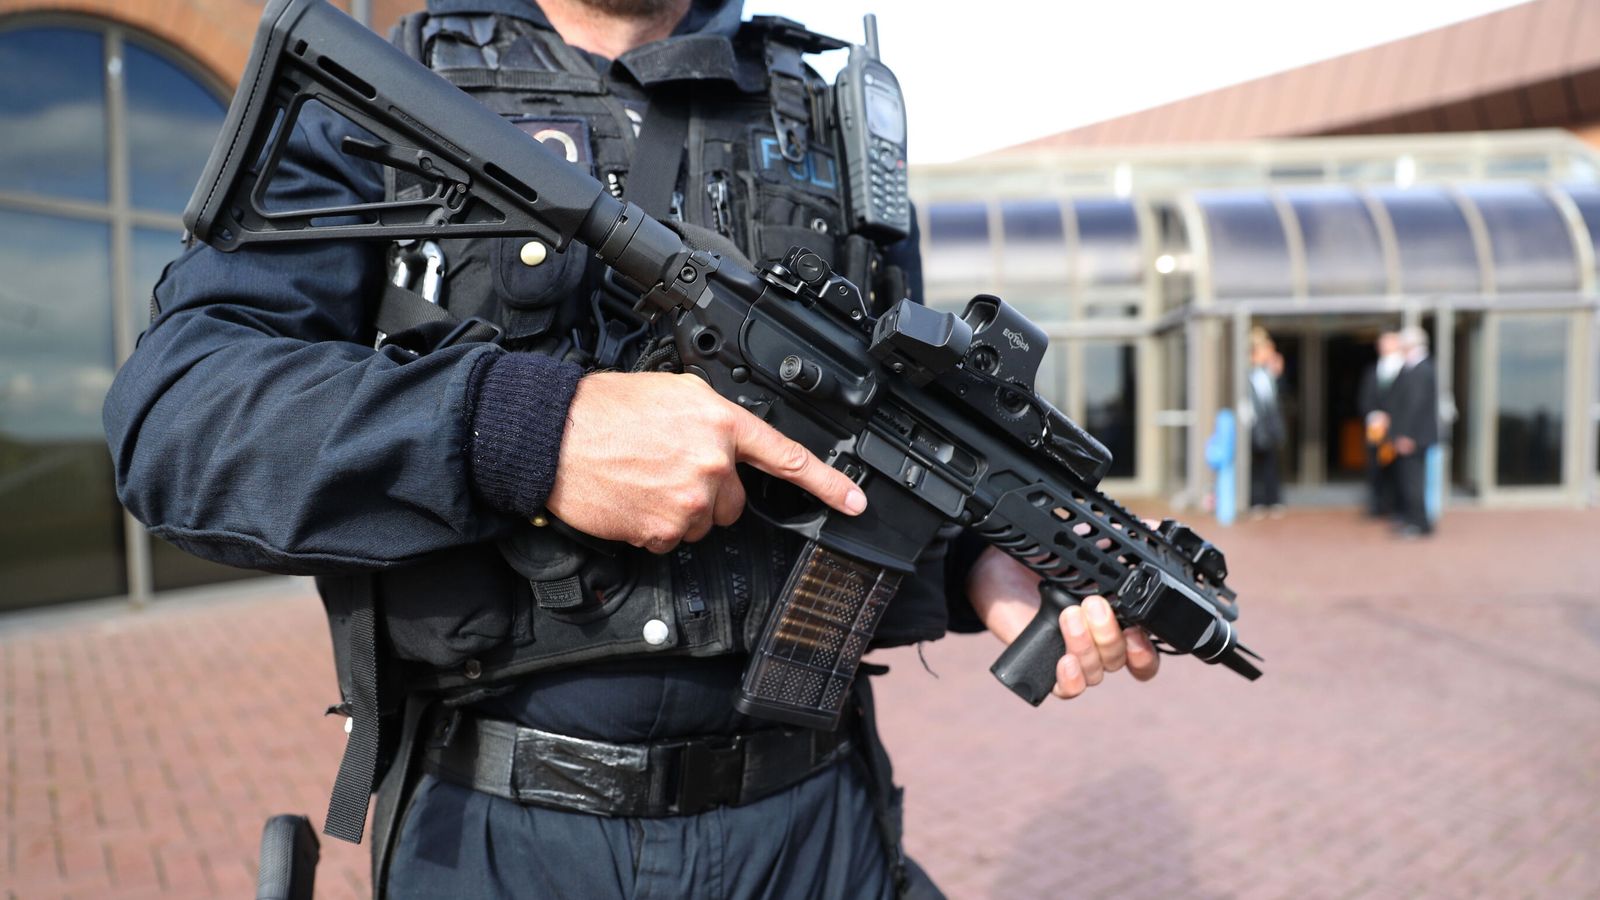 File photo dated 16/9/2017 of an armed police officer on patrol. The huge counter-terrorism effort is placing an unsustainable strain on Britain's wider policing service, one of the country's most senior officers warns on Friday.